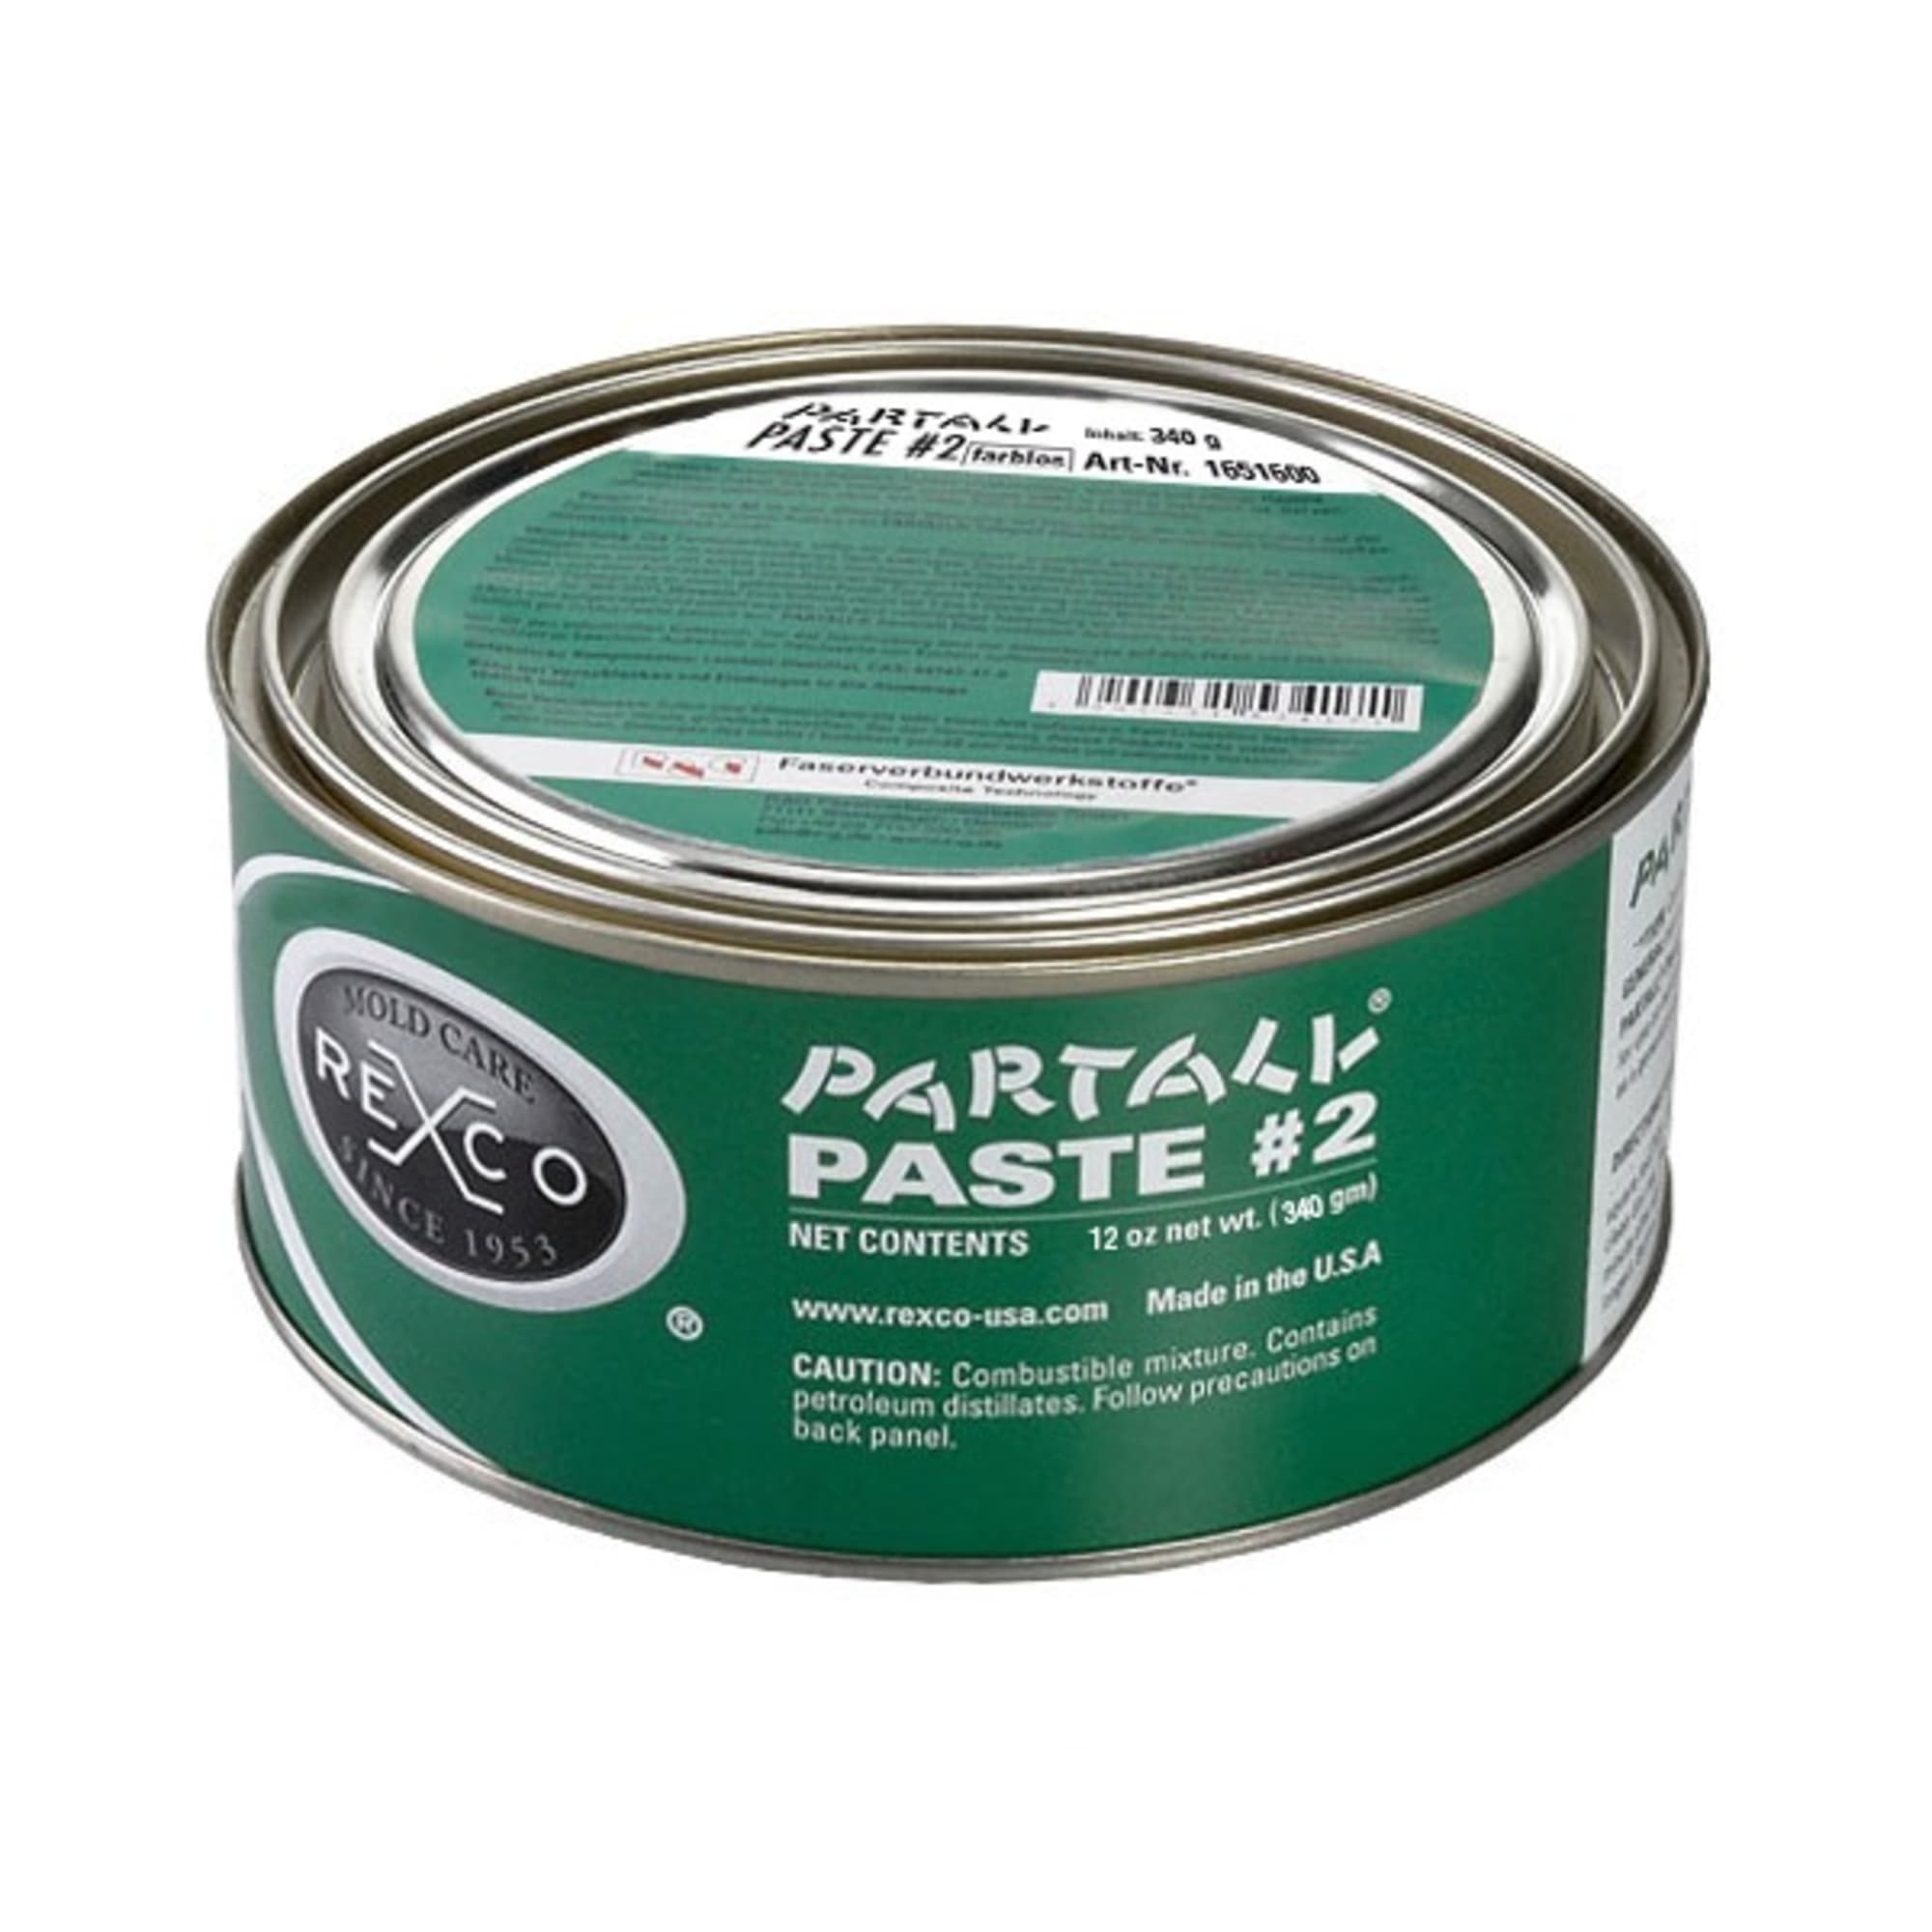 Partall Paste Wax #2 in stock. Excellent mold release - Fibre Glast